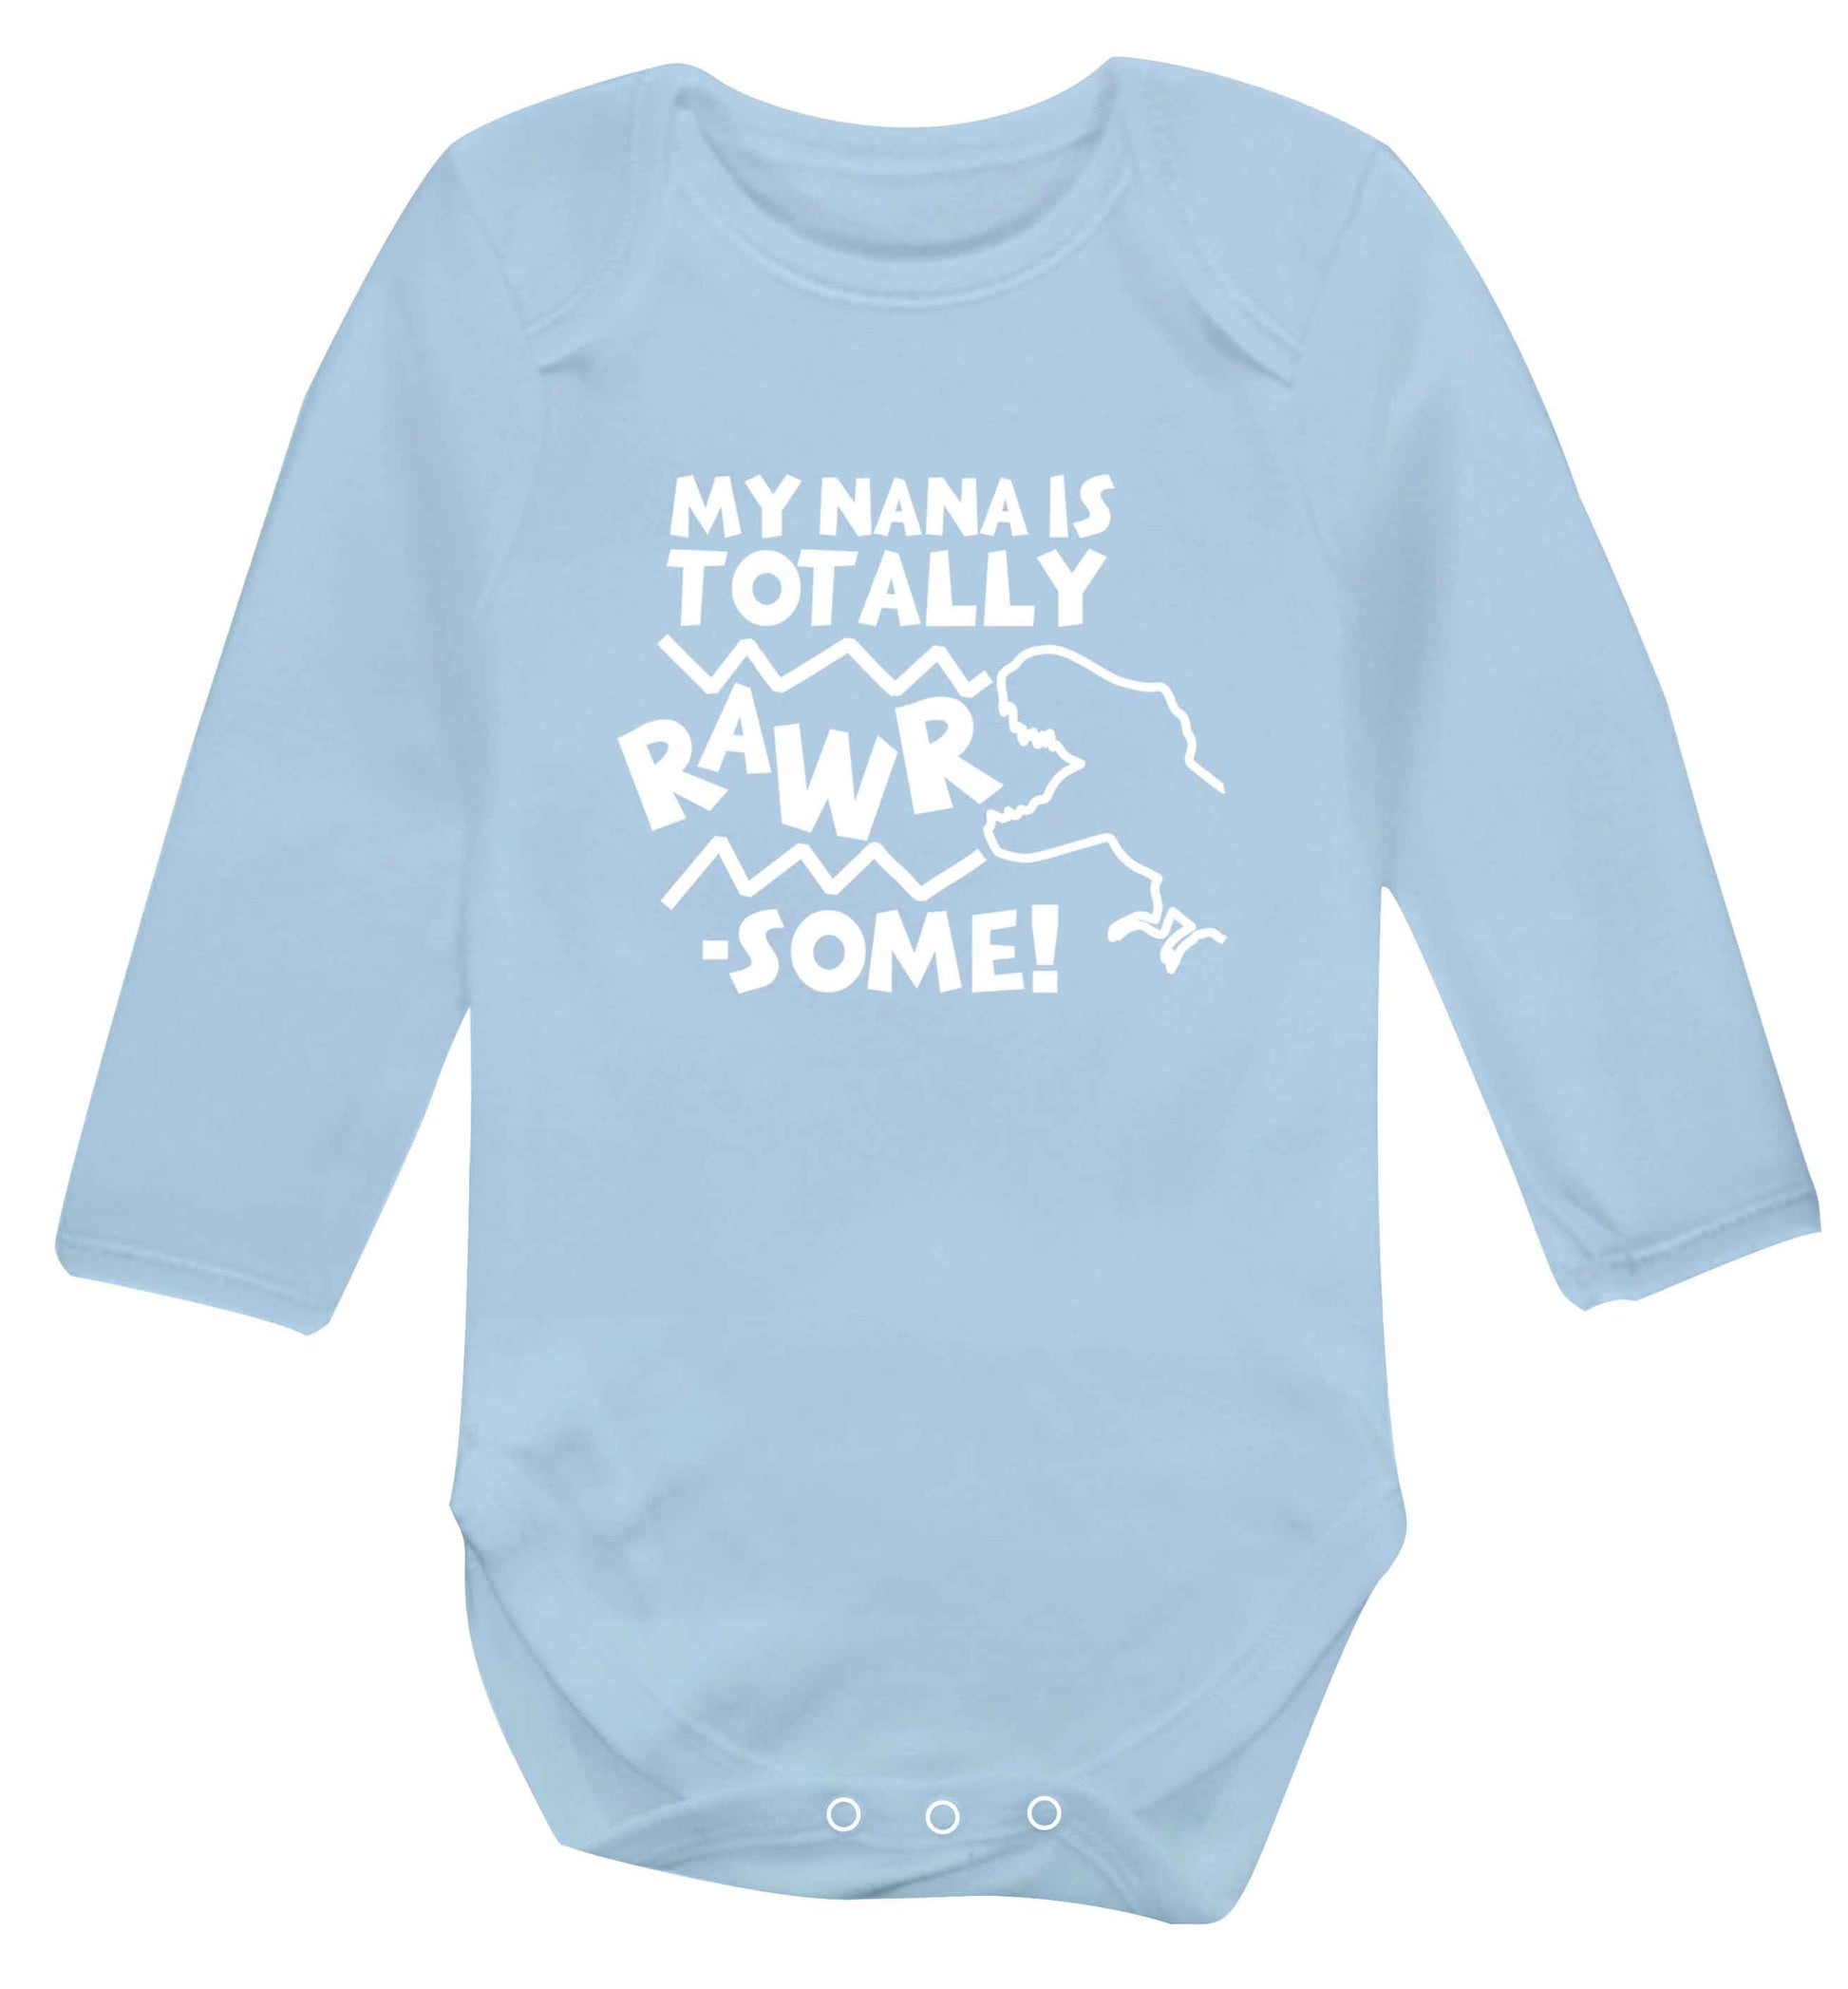 My nana is totally rawrsome baby vest long sleeved pale blue 6-12 months